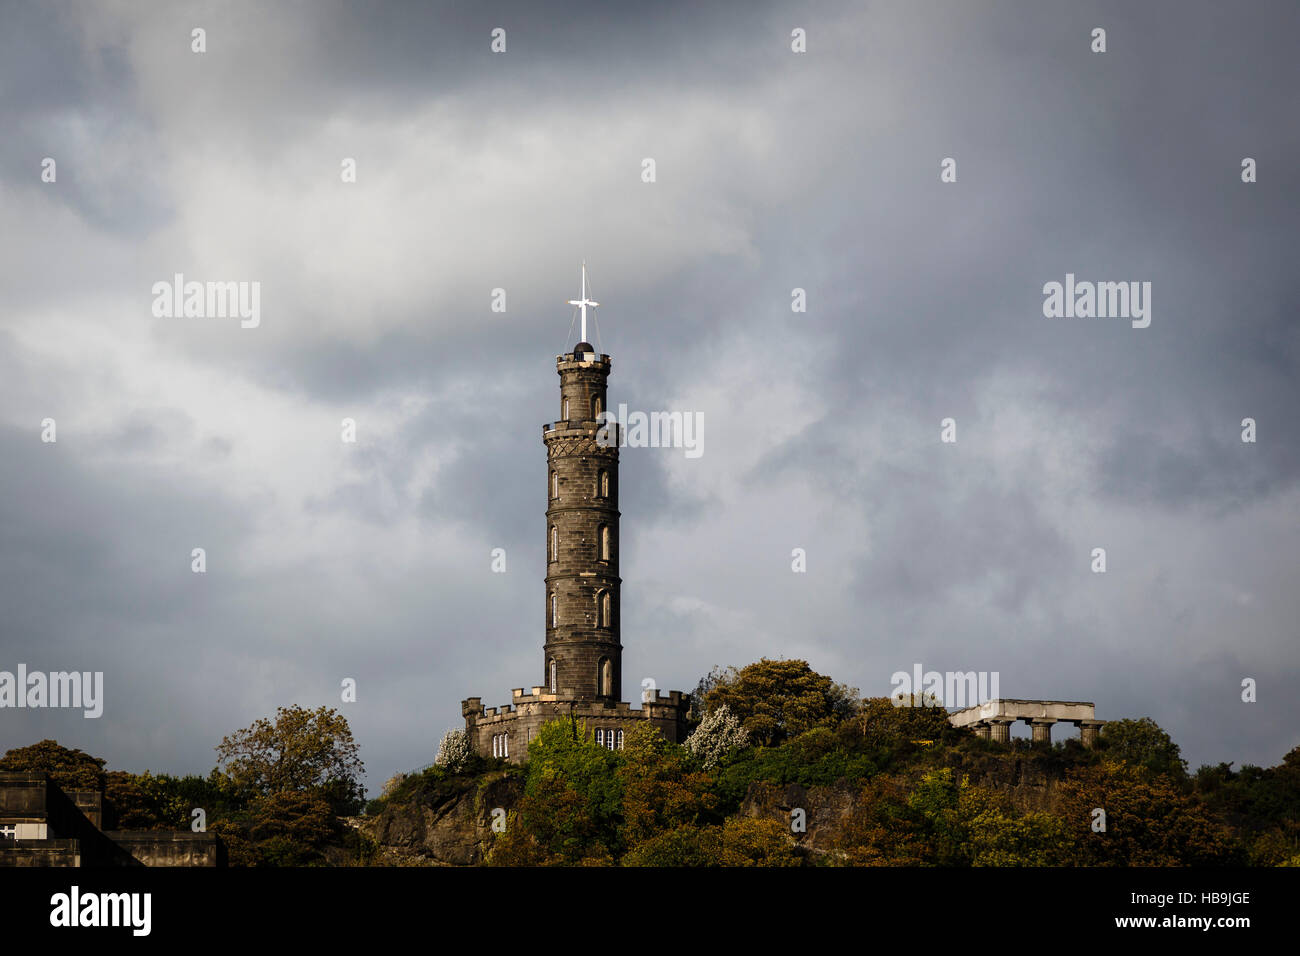 The Nelson Monument on Calton Hill, Edinburgh, Scotland, with stormy skies behind. Stock Photo